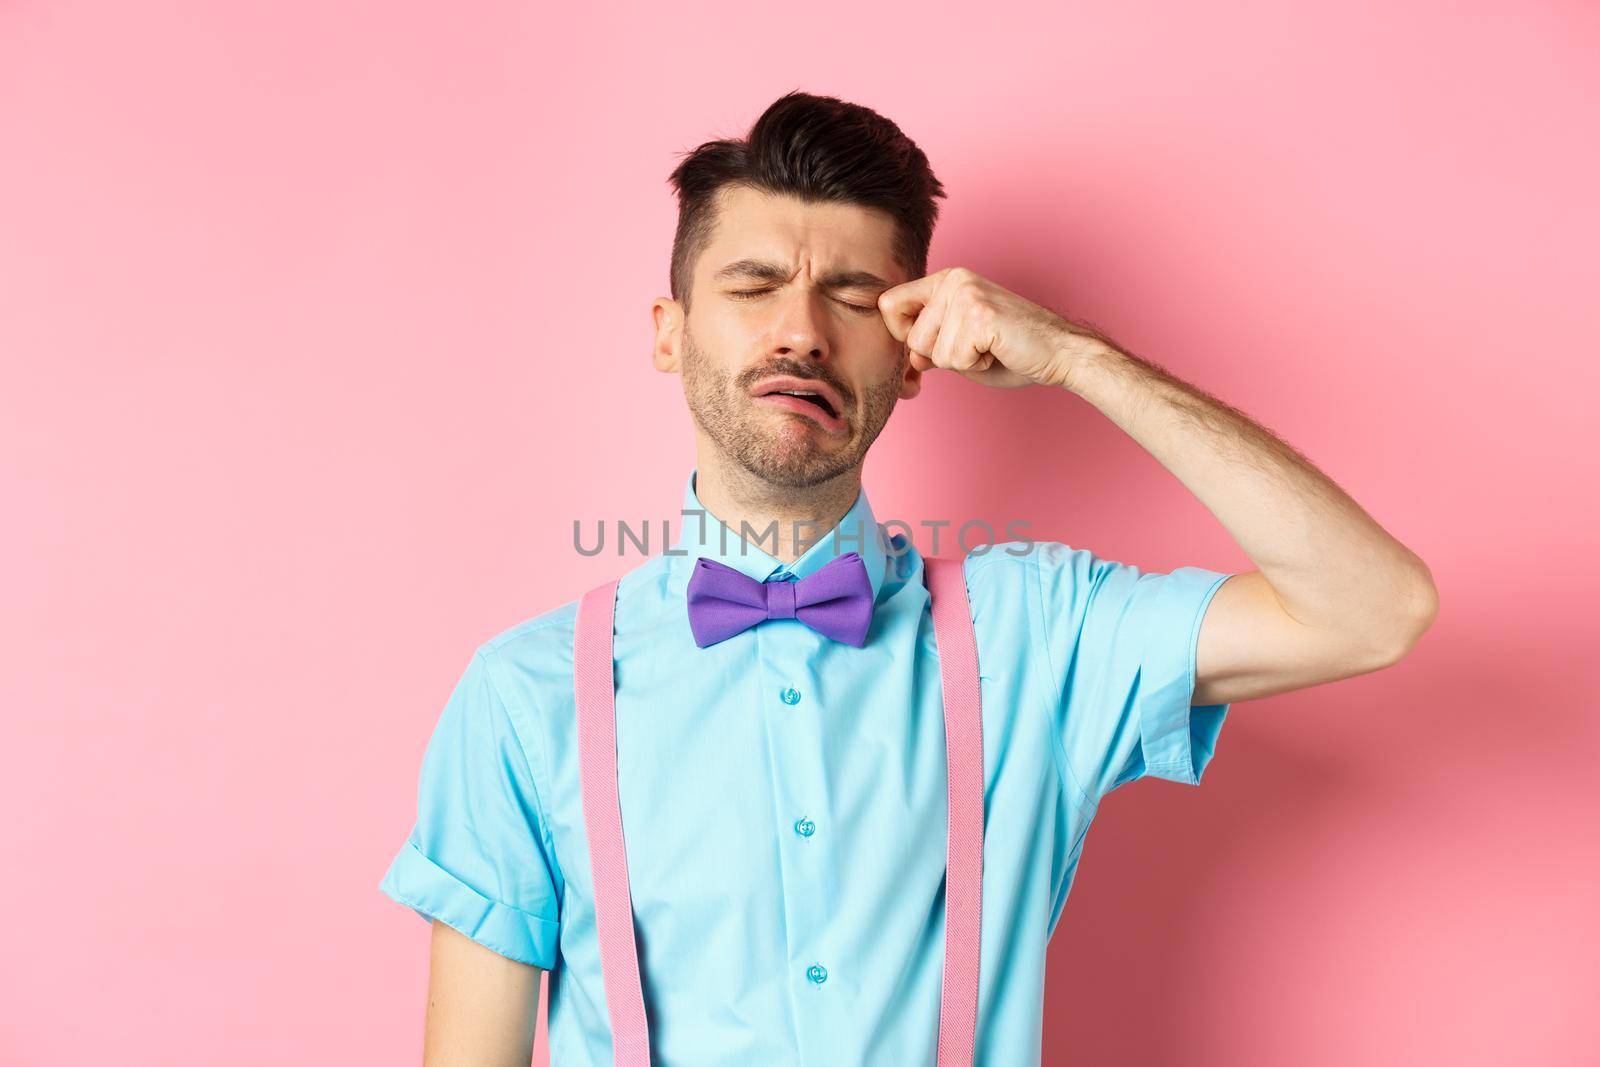 Image of heartbroken guy crying and wiping tear off face, sobbing and feeling sad or lonely, standing upset on pink background.